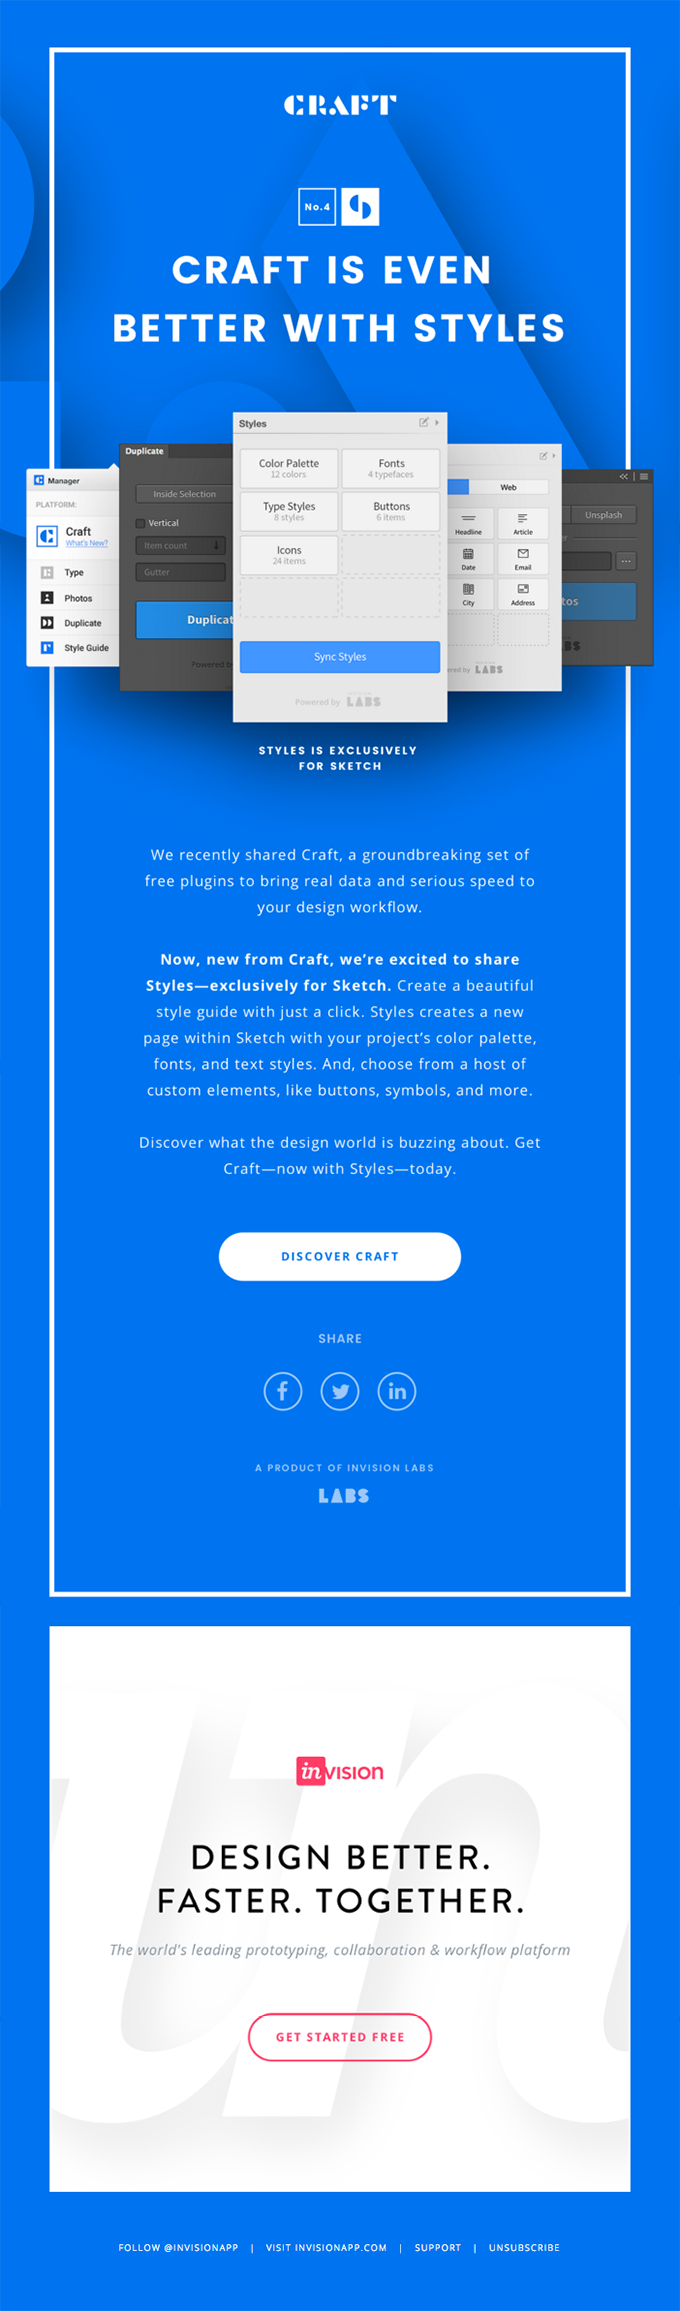 13 Of The Best Examples Of Beautiful Email Design